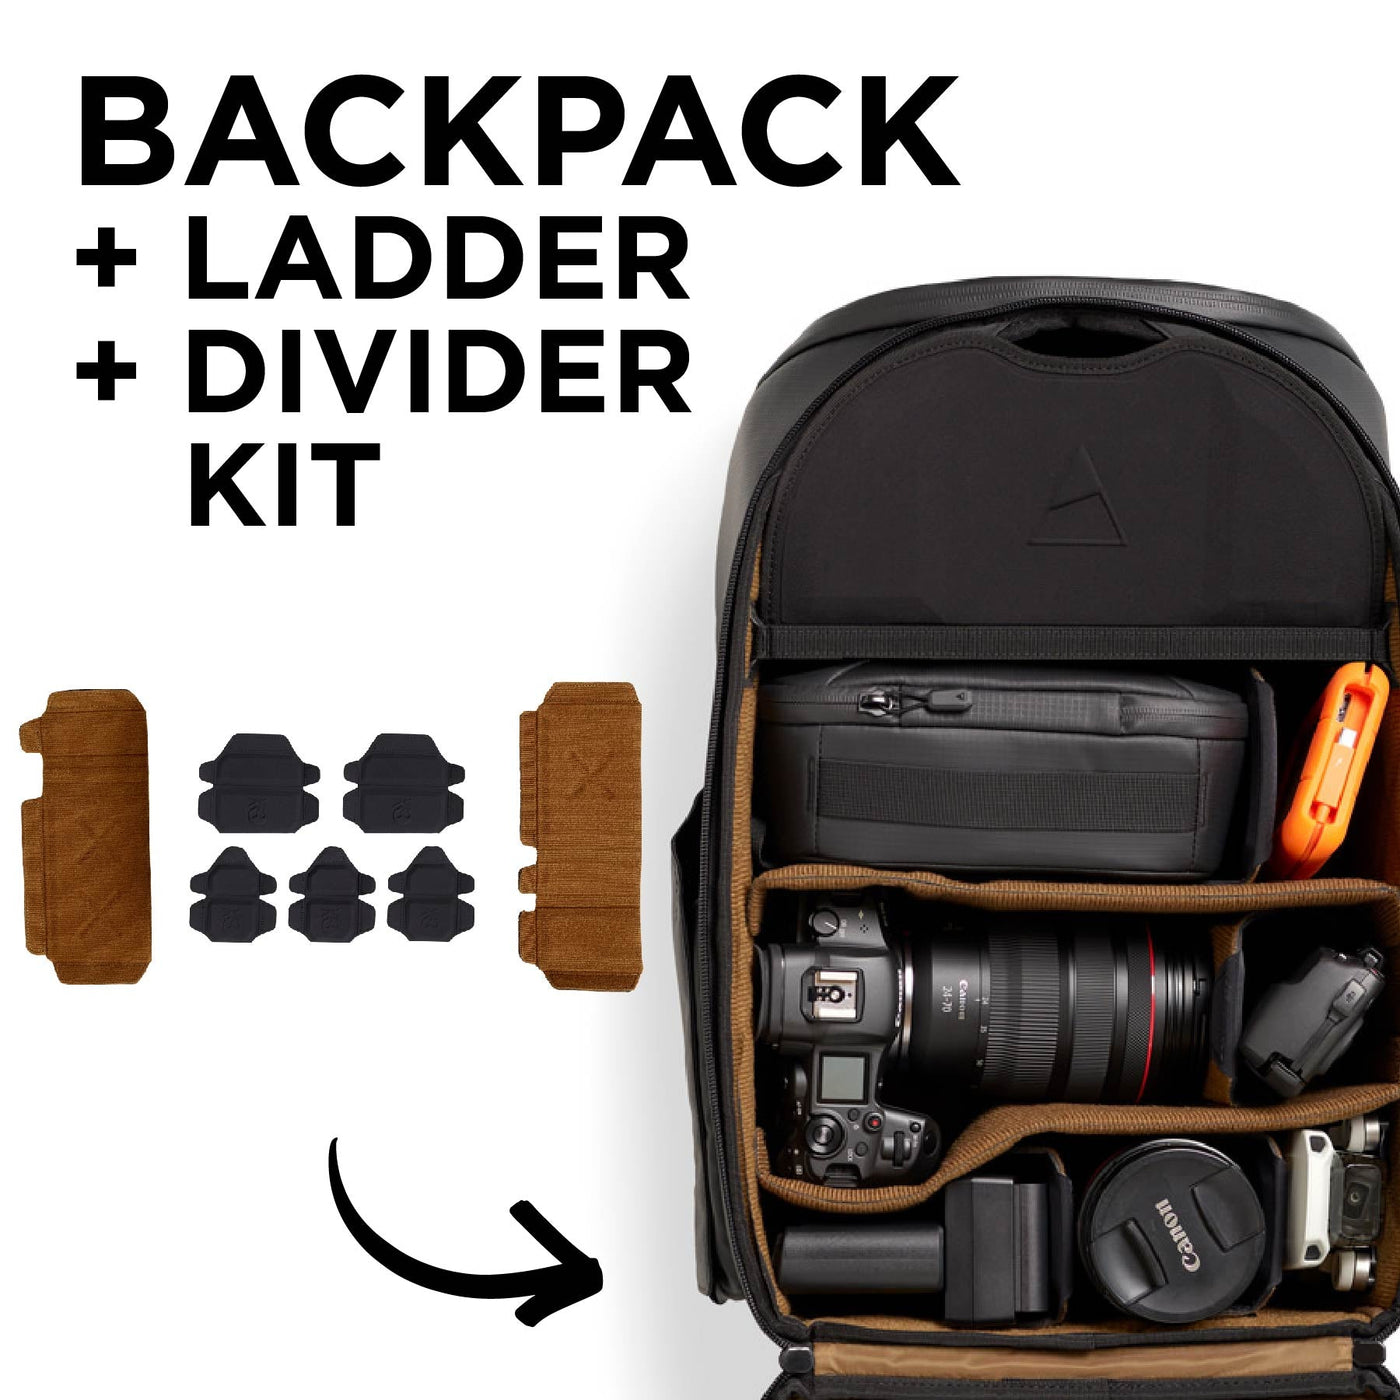 McKinnon Camera Backpack 25L - NOMATIC Travel Bags and Packs